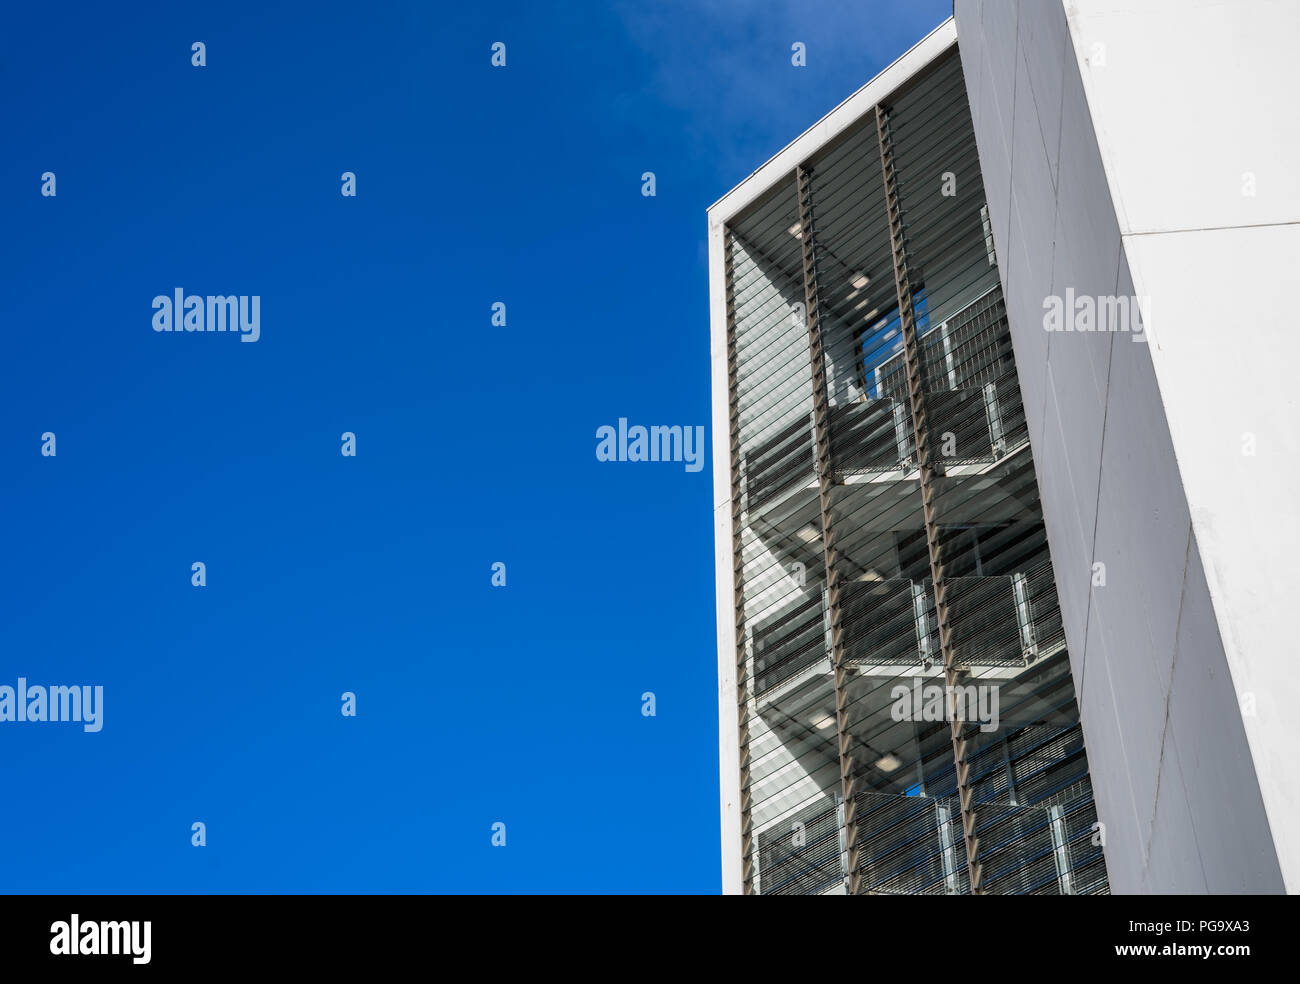 Stairway on a modern concrete multi storey building. Stock Photo